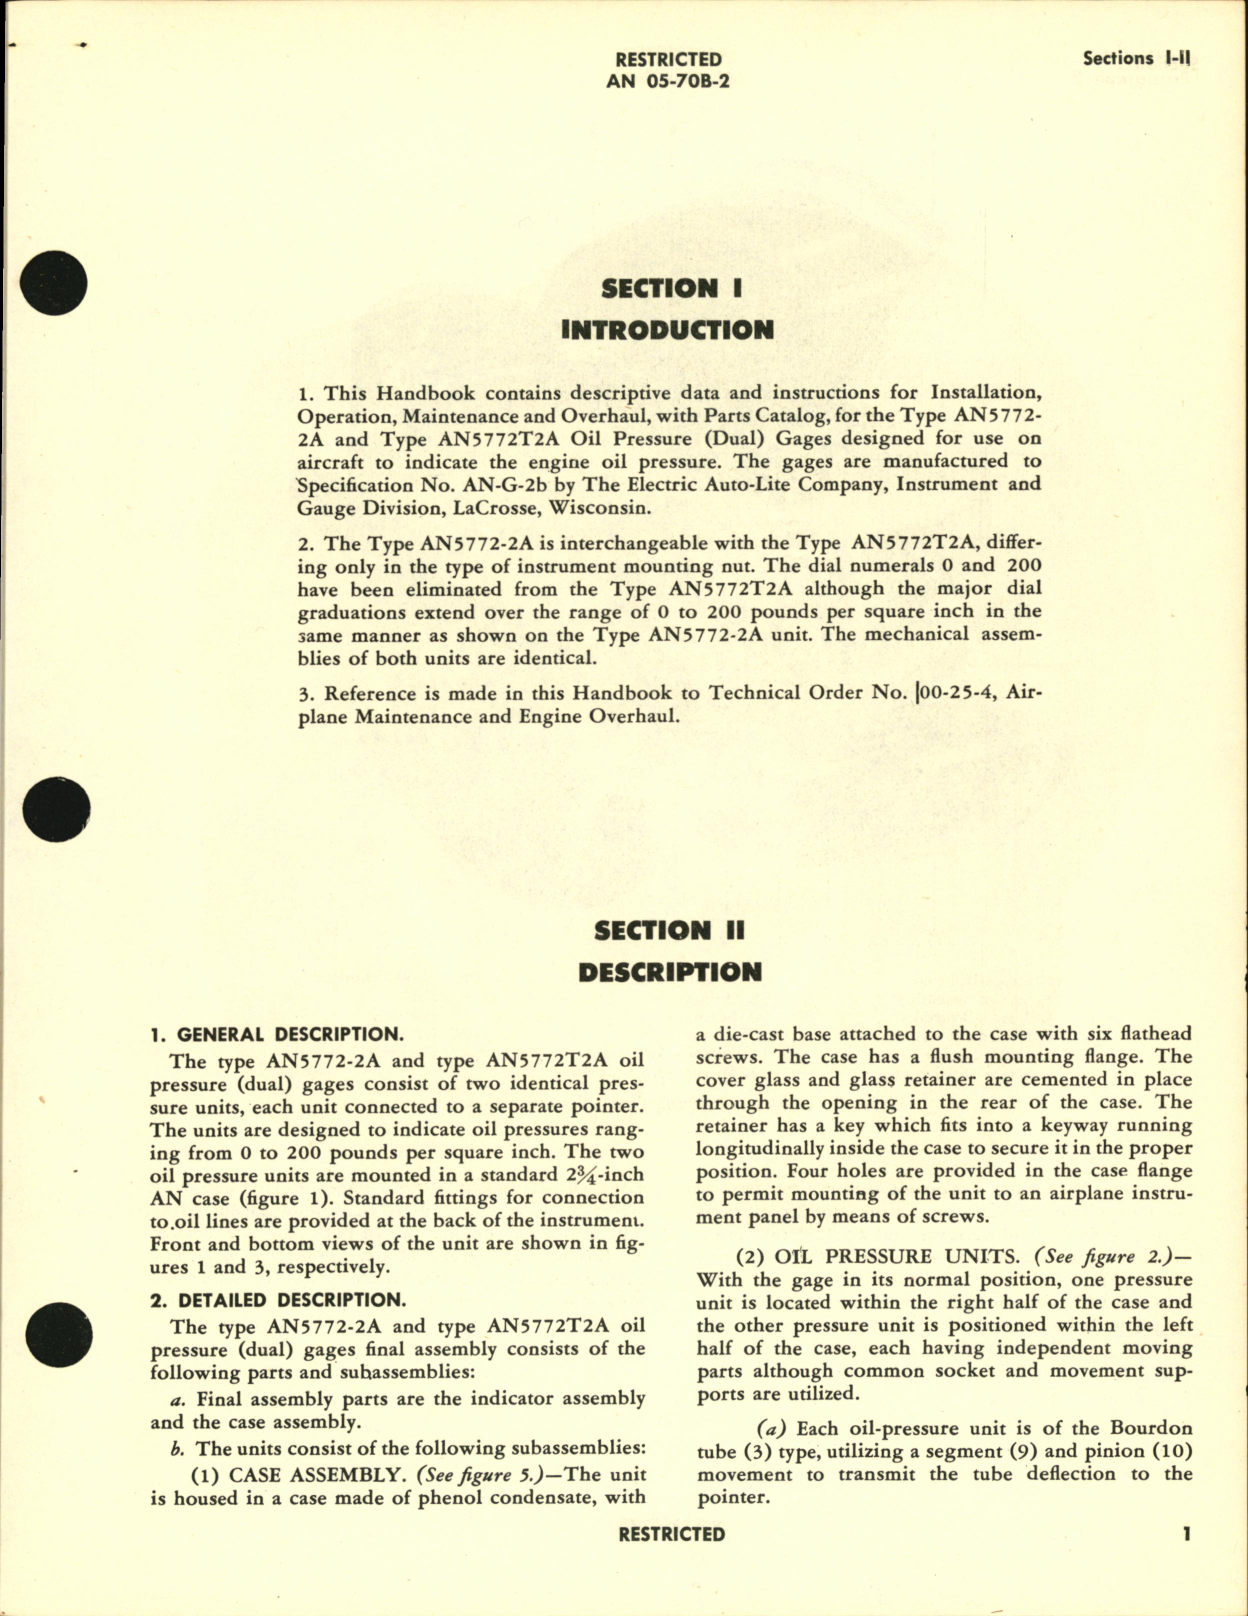 Sample page 5 from AirCorps Library document: Operation, Service, & Overhaul Instructions with Parts Catalog for Dual Oil Pressure Gages